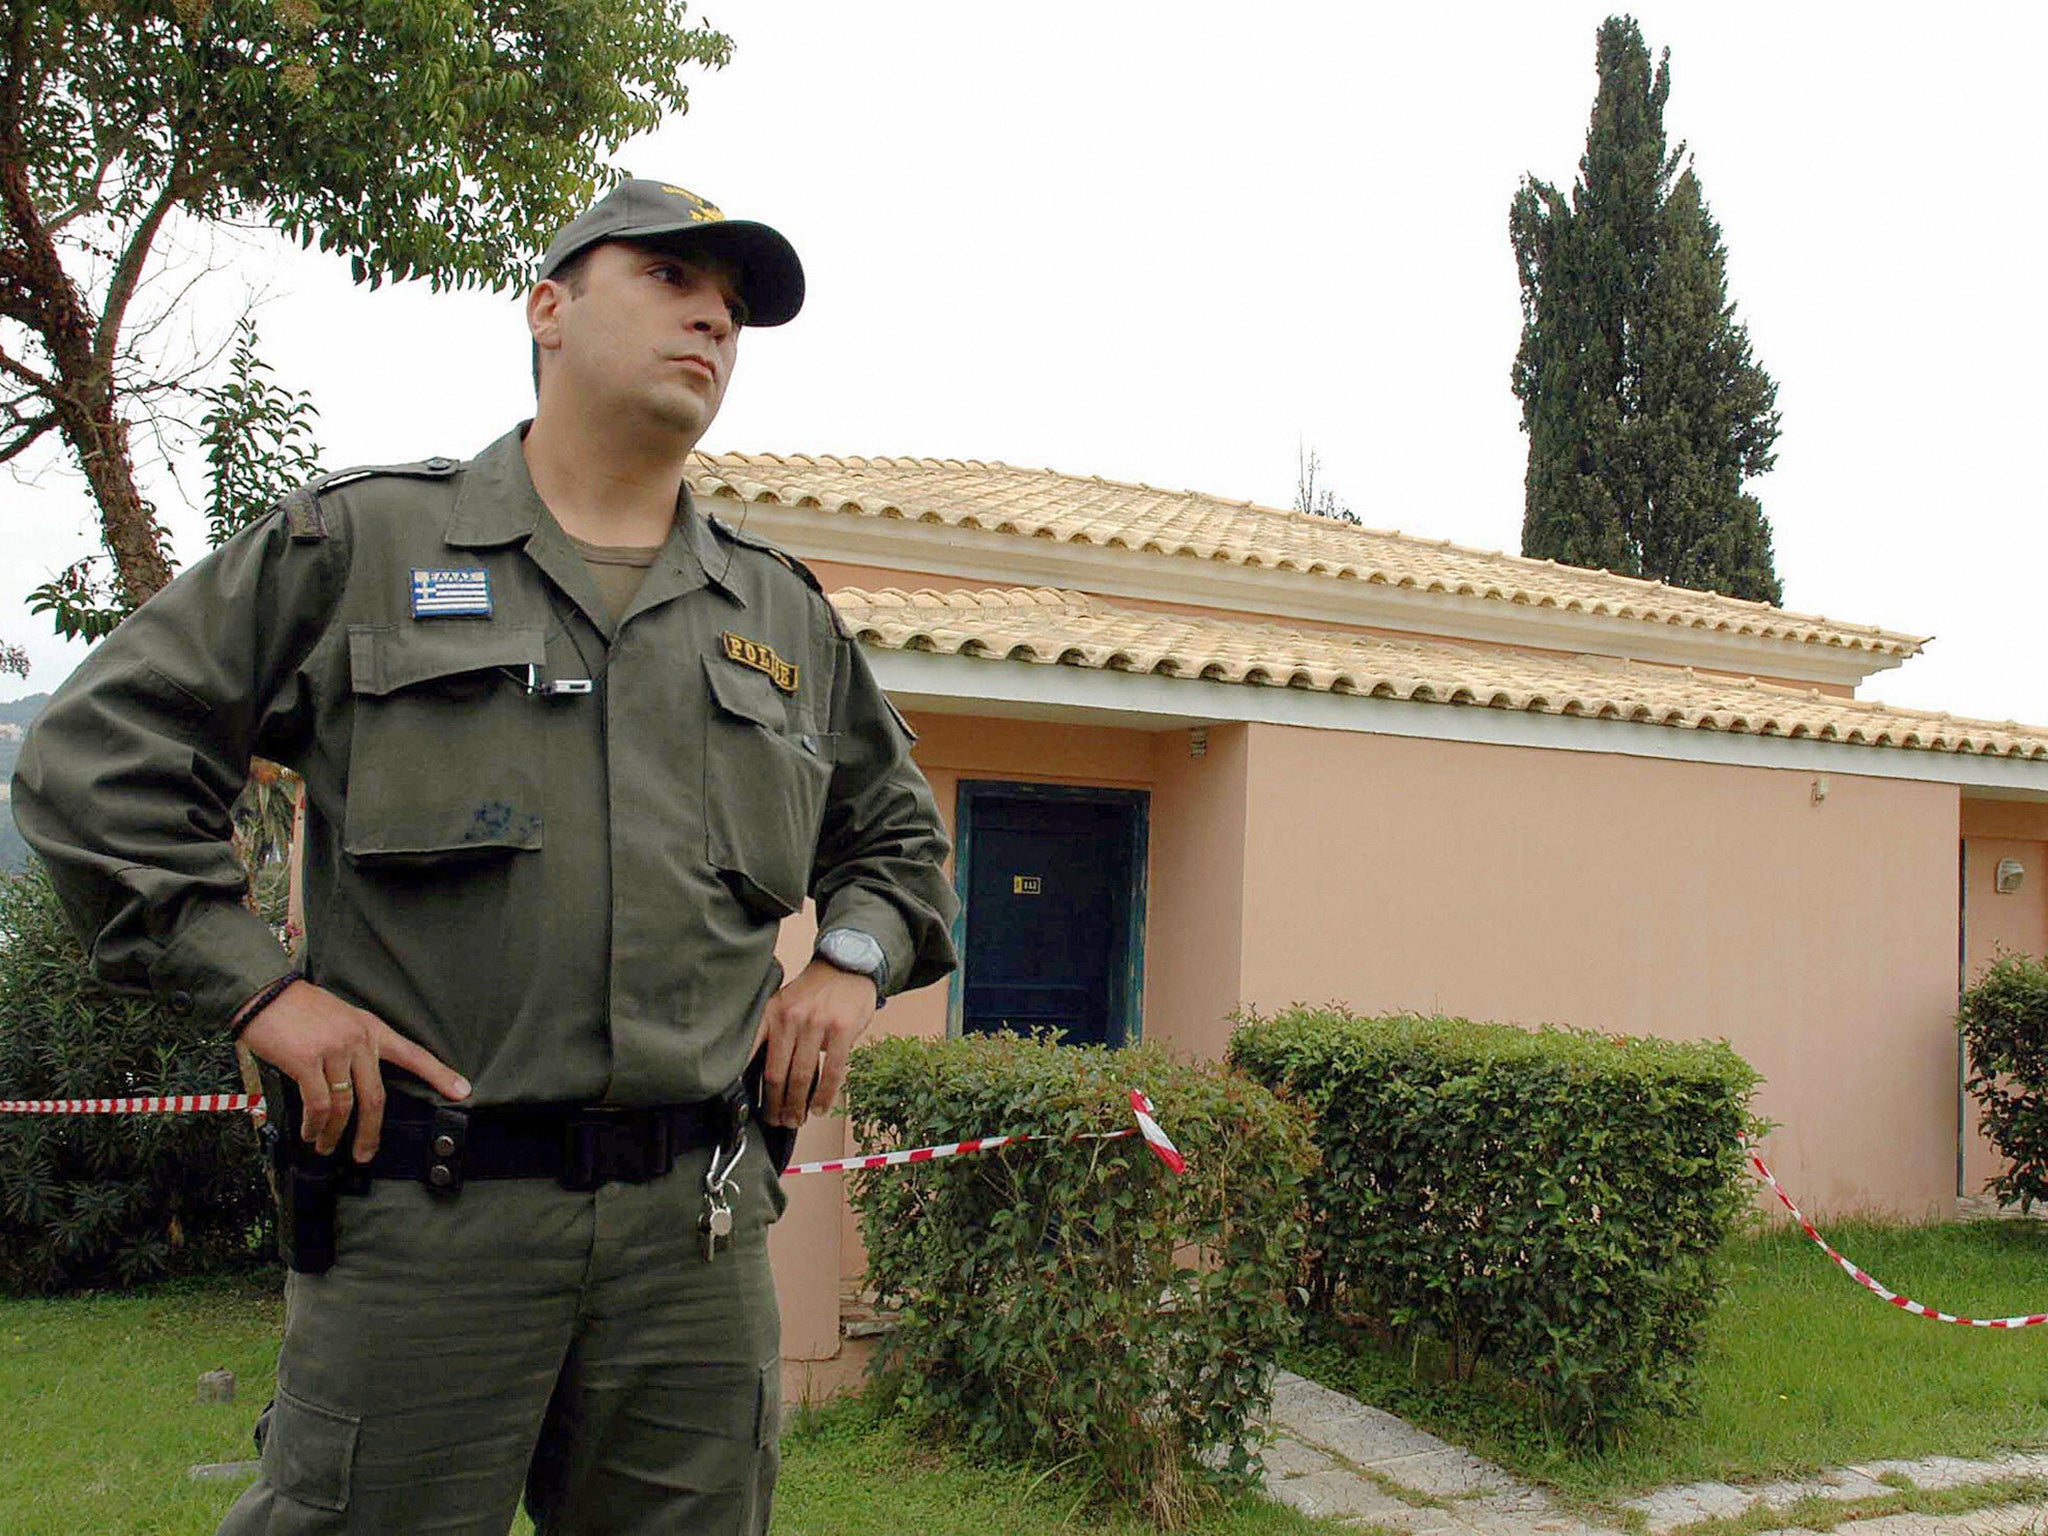 The semi-detached bungalow on Corfu where the two children died from carbon monoxide poisoning